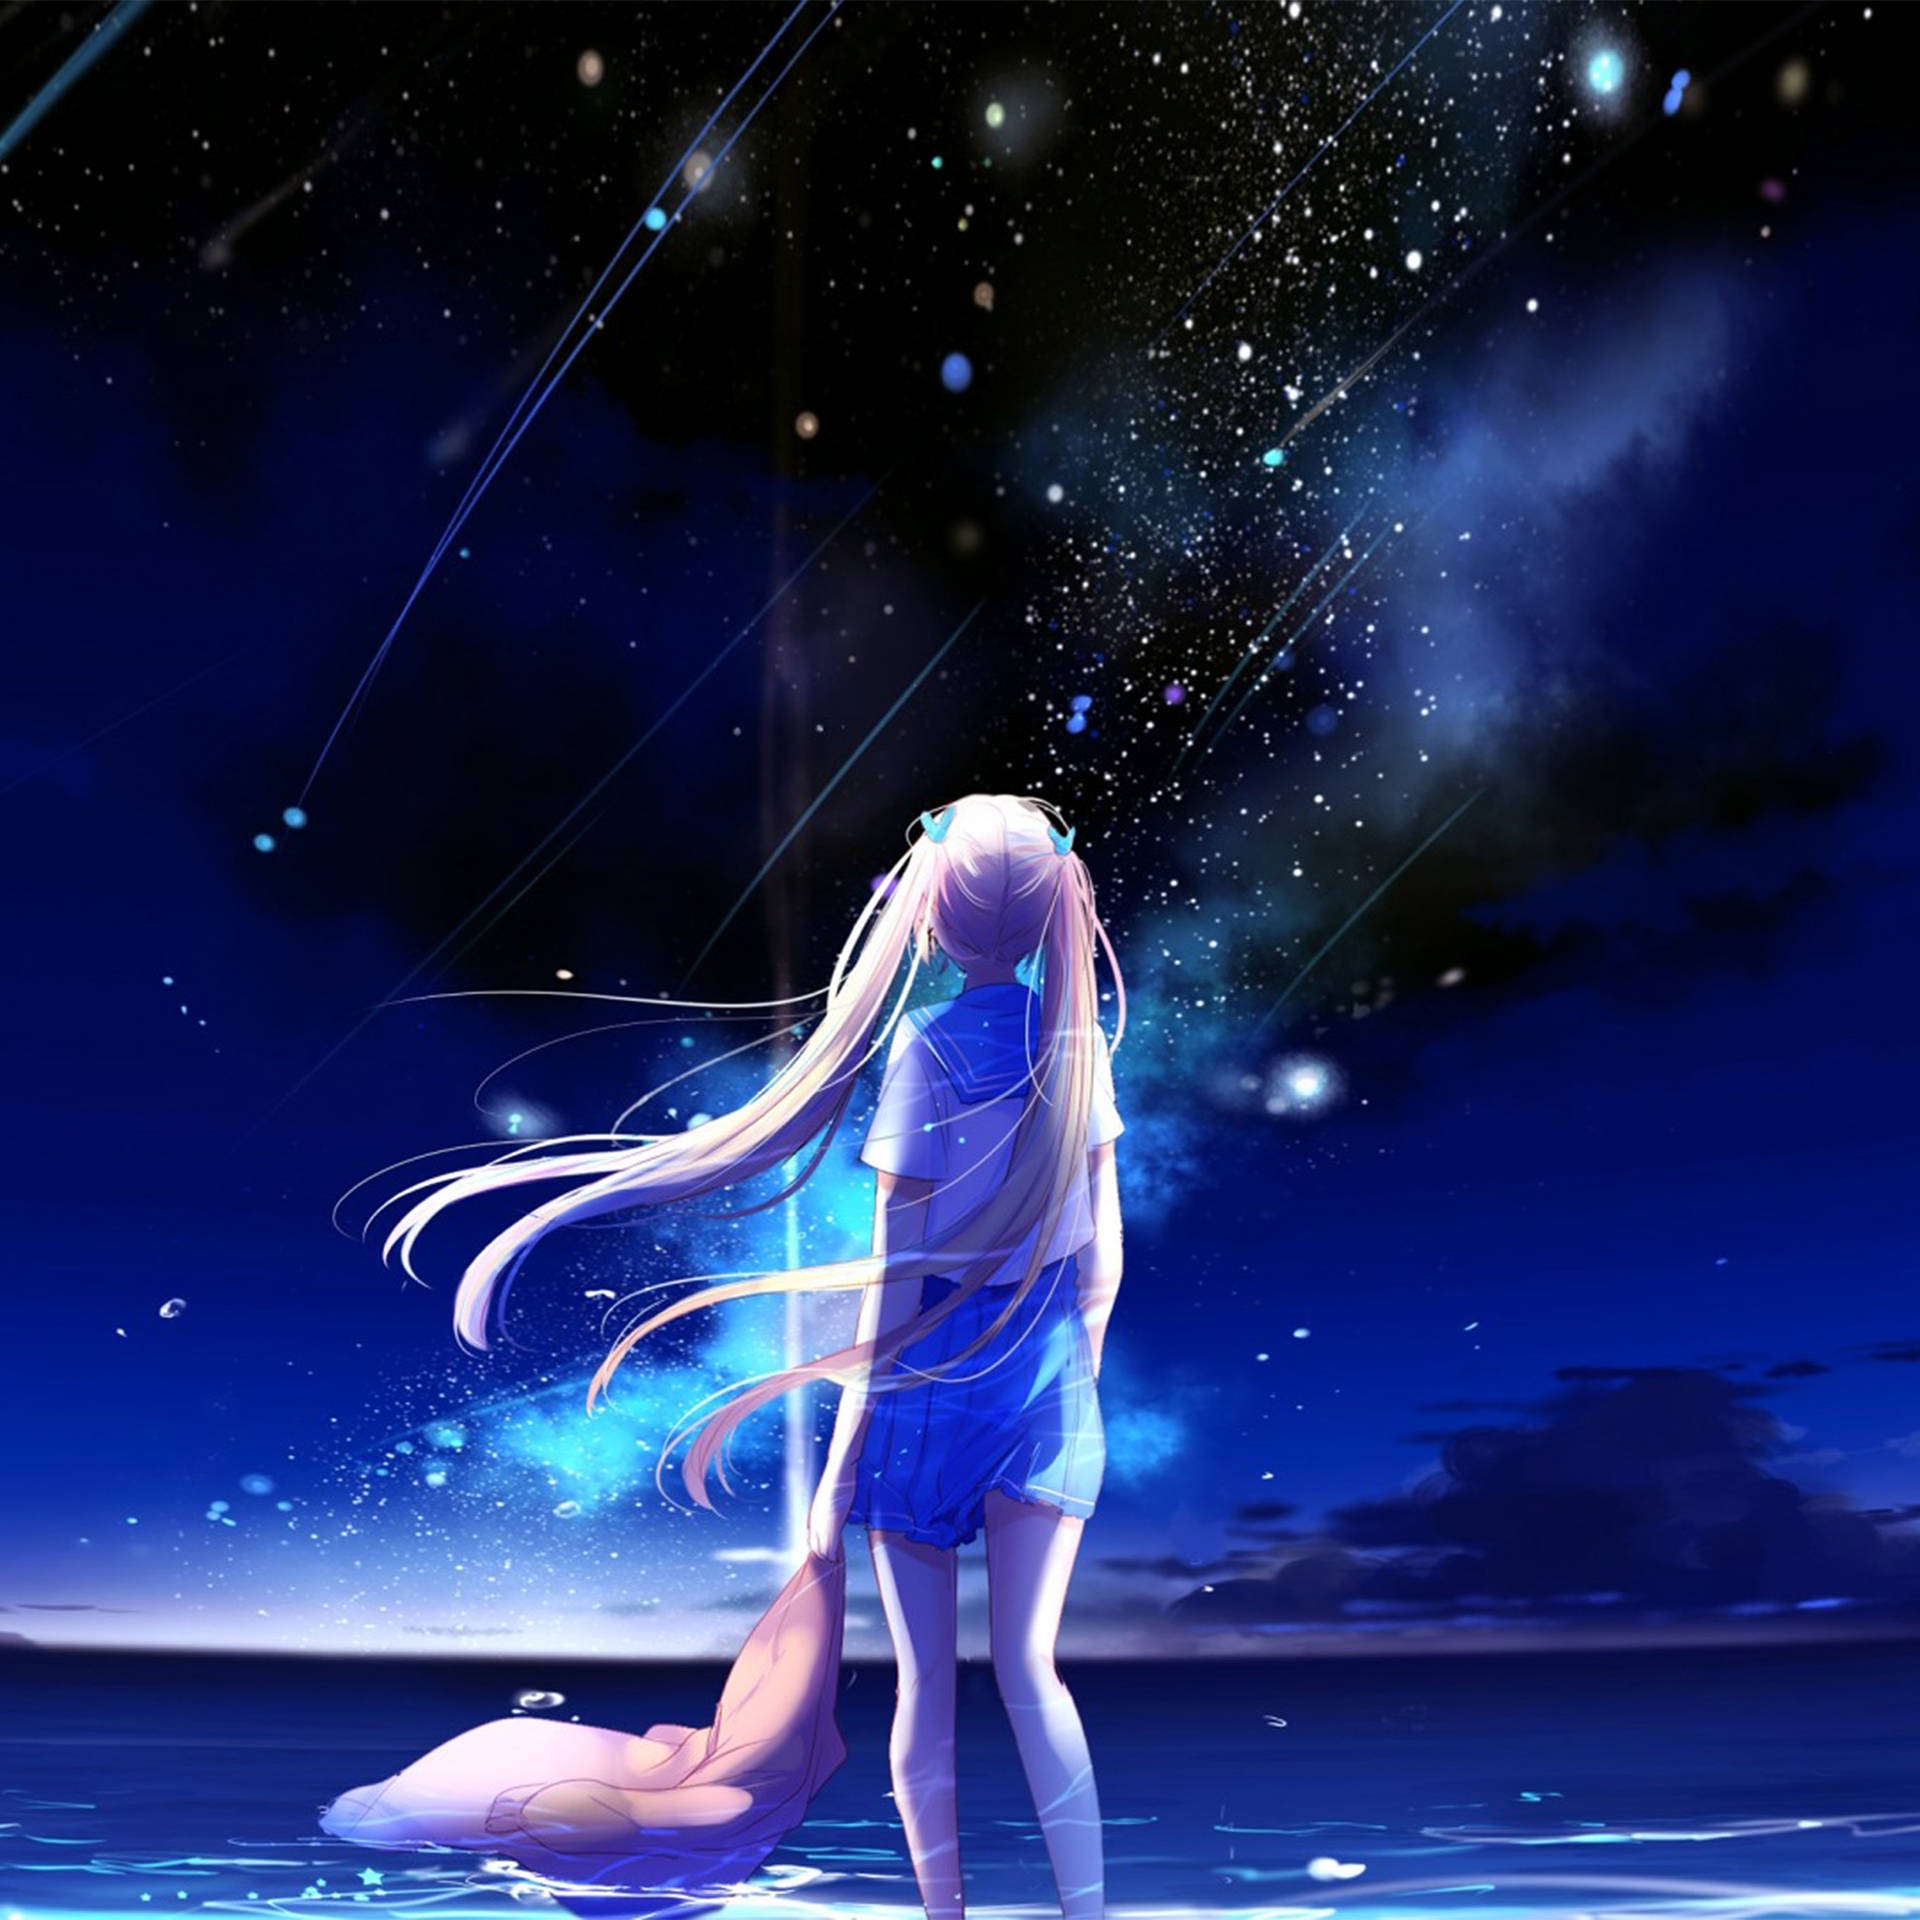 Free Anime Wallpaper Downloads, [5900+] Anime Wallpapers for FREE |  